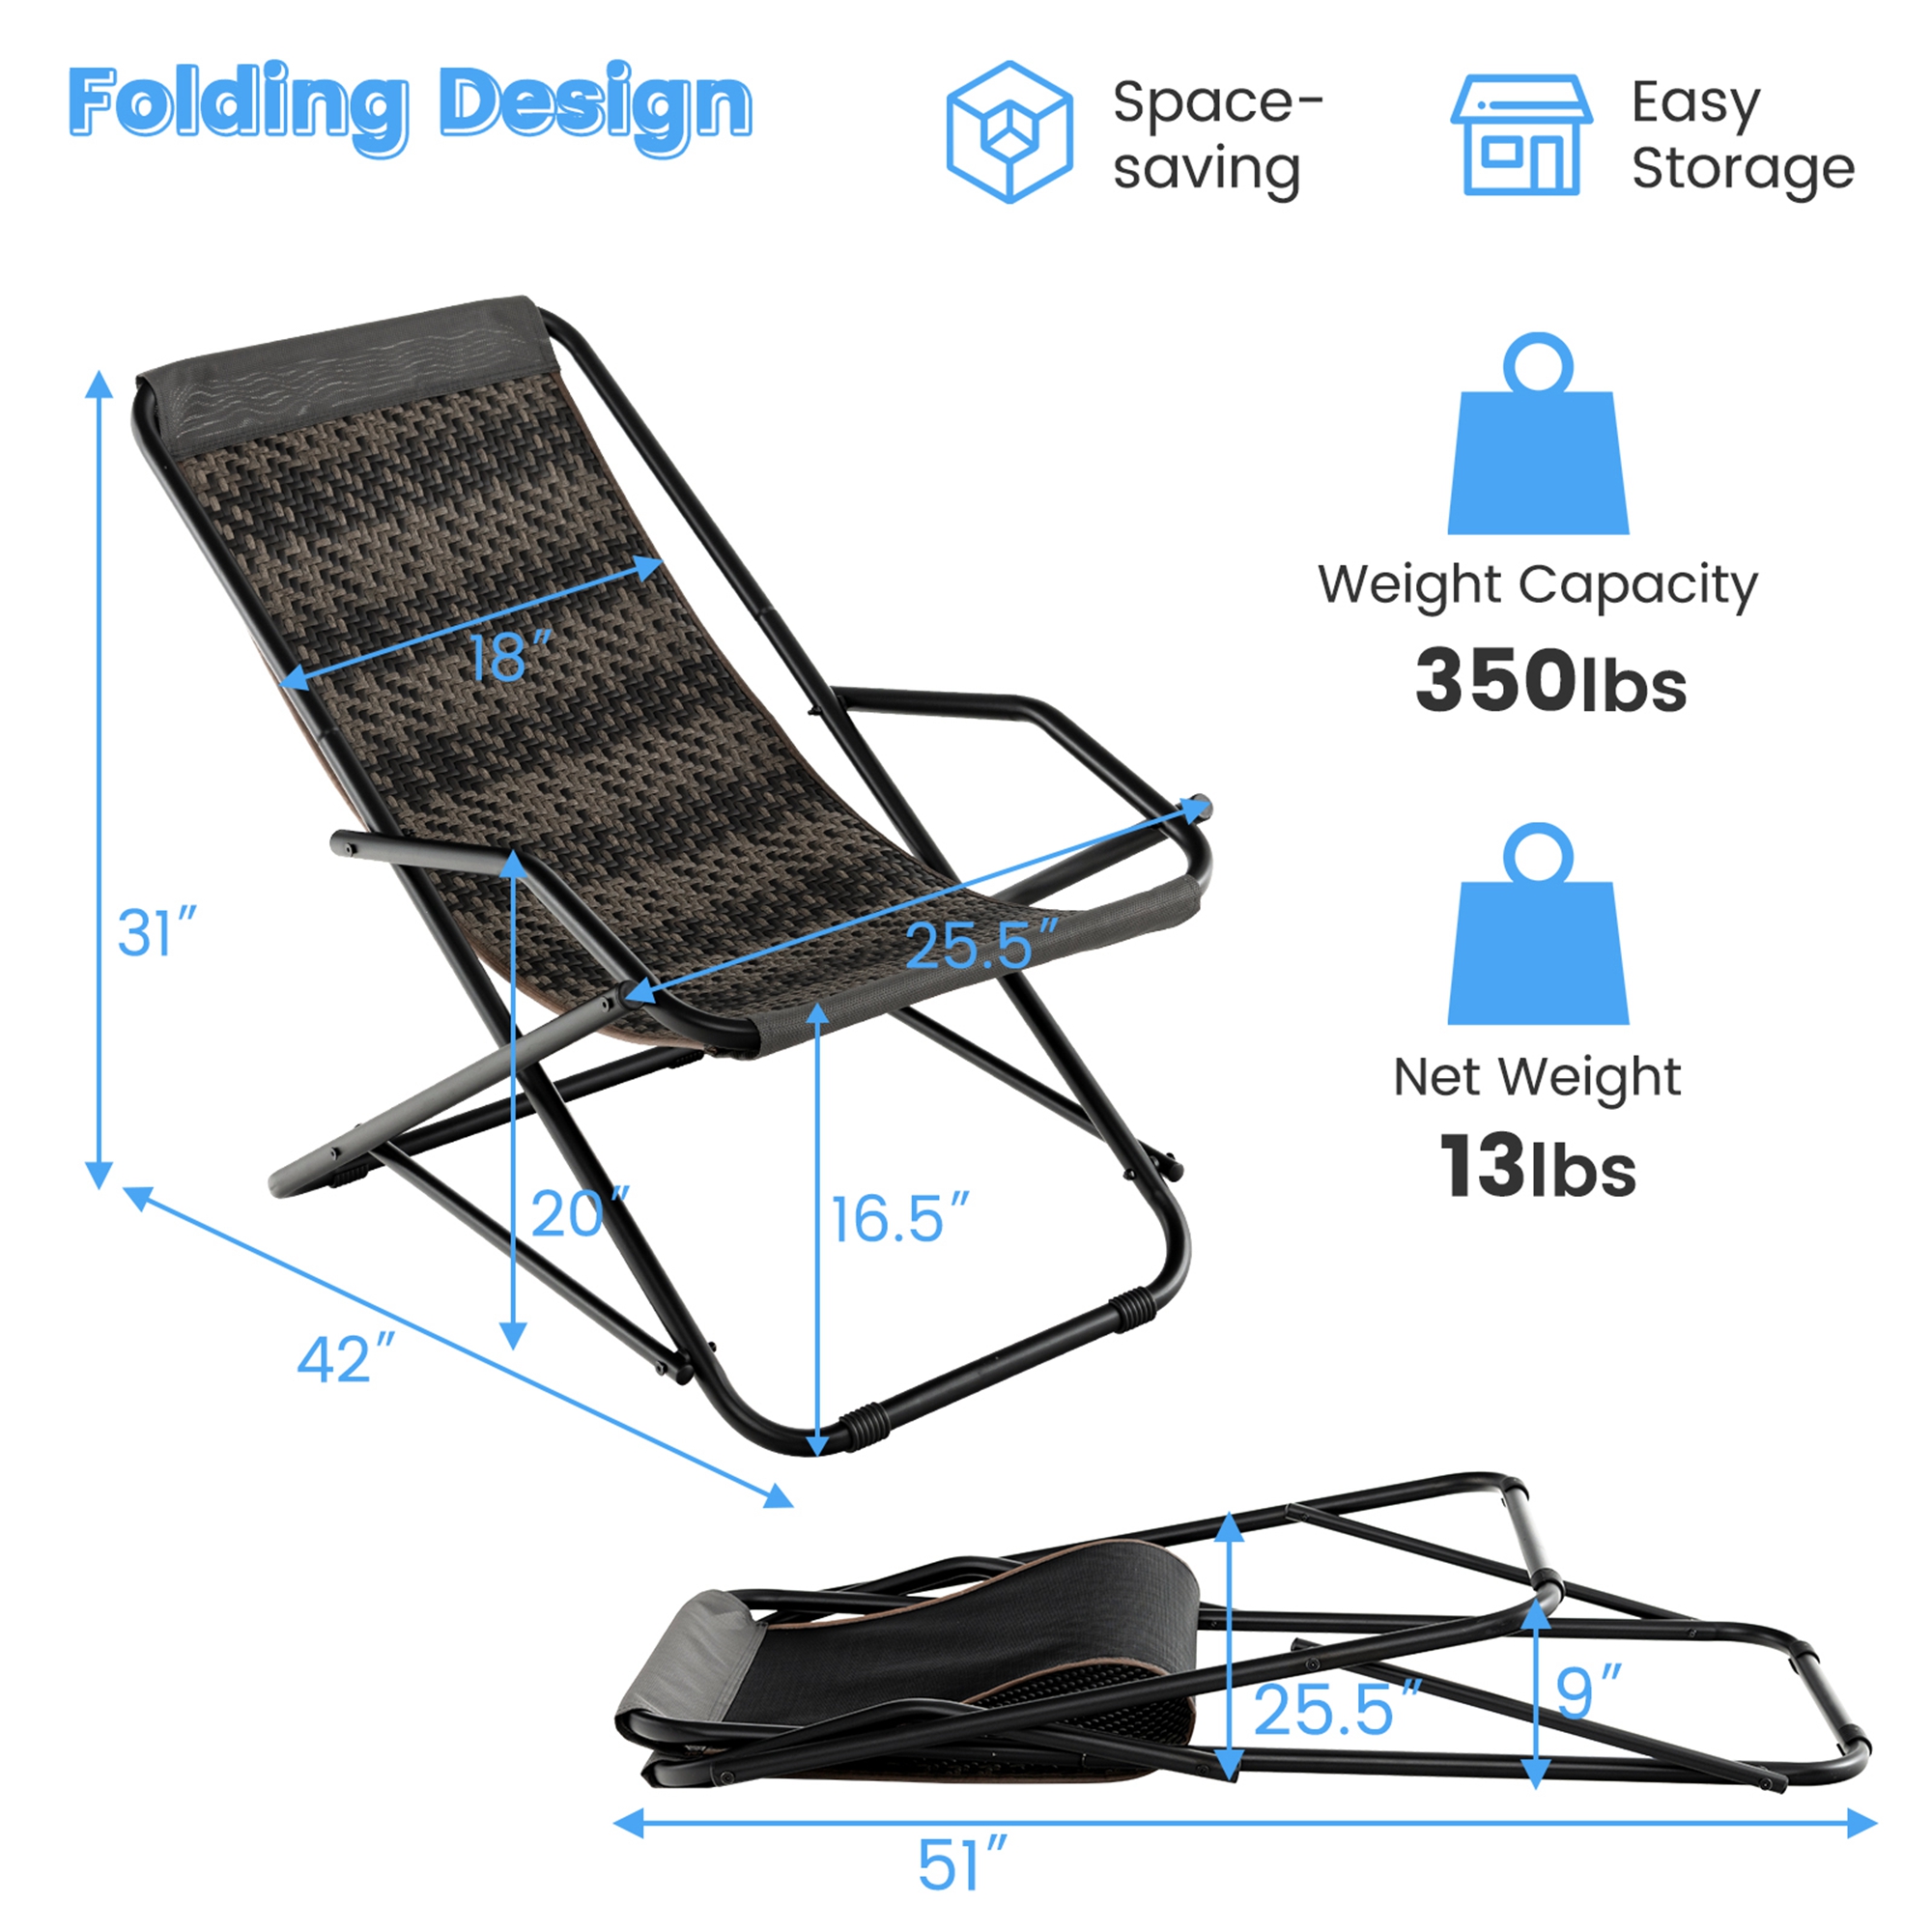 Costway 1 PC Patio Folding Rattan Sling Chair Rocking Lounge Chaise Armrest Garden Portable - image 3 of 8